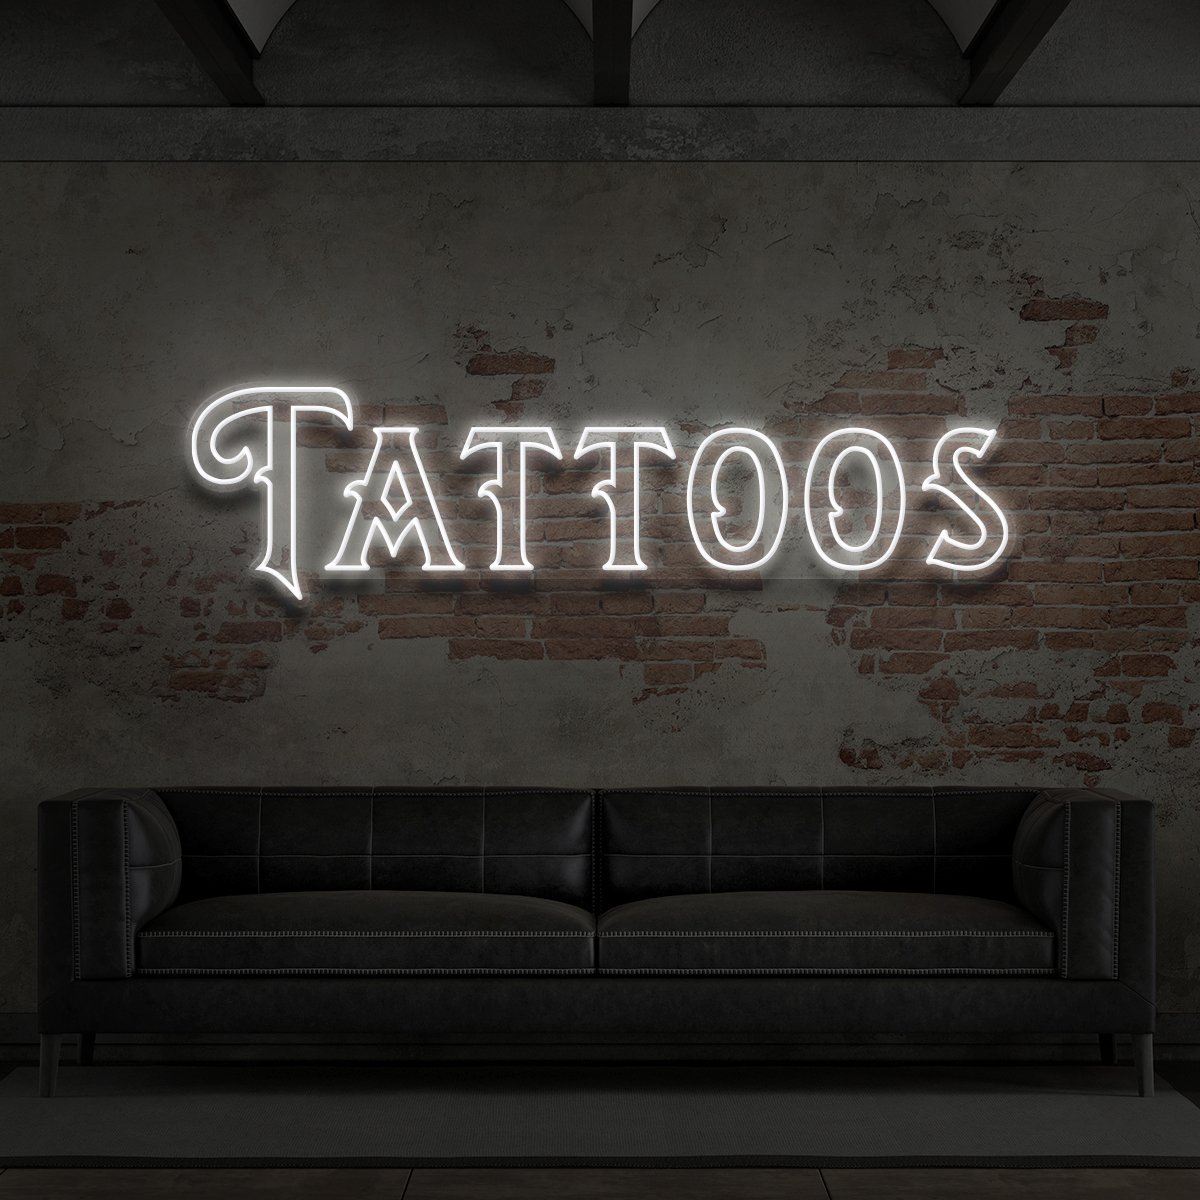 "Tattoos" Neon Sign for Tattoo Parlours